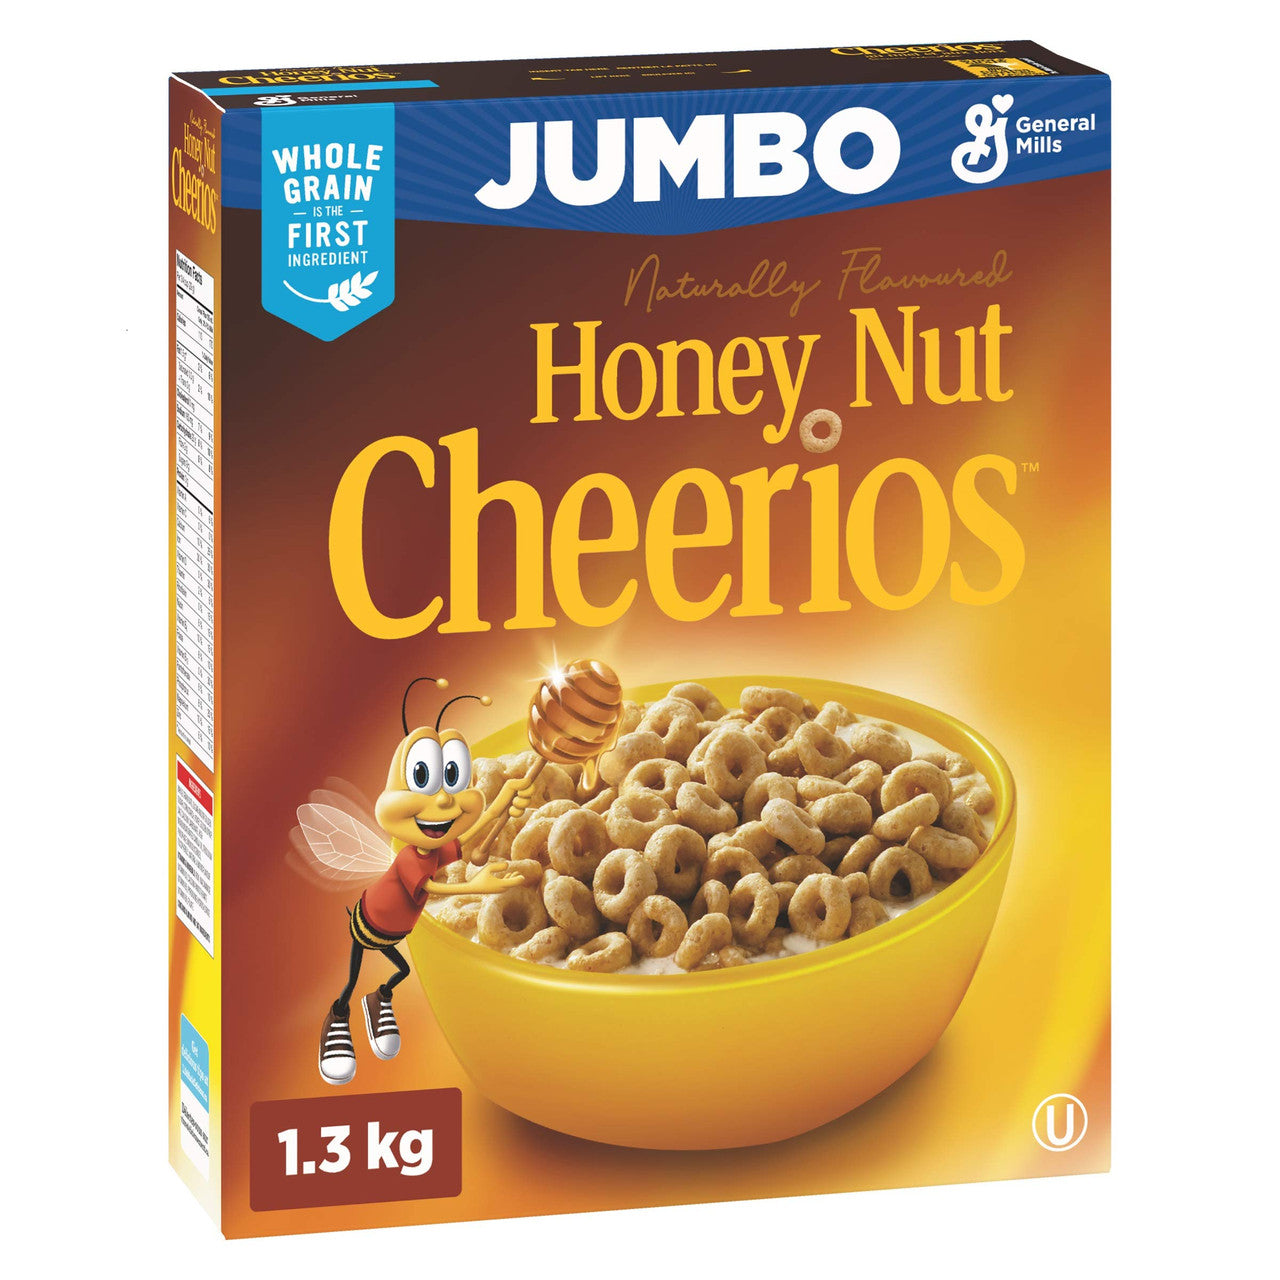 Cheerios Honey Nut Jumbo Cereal, 1.3kg/45.85oz, (Imported from Canada)